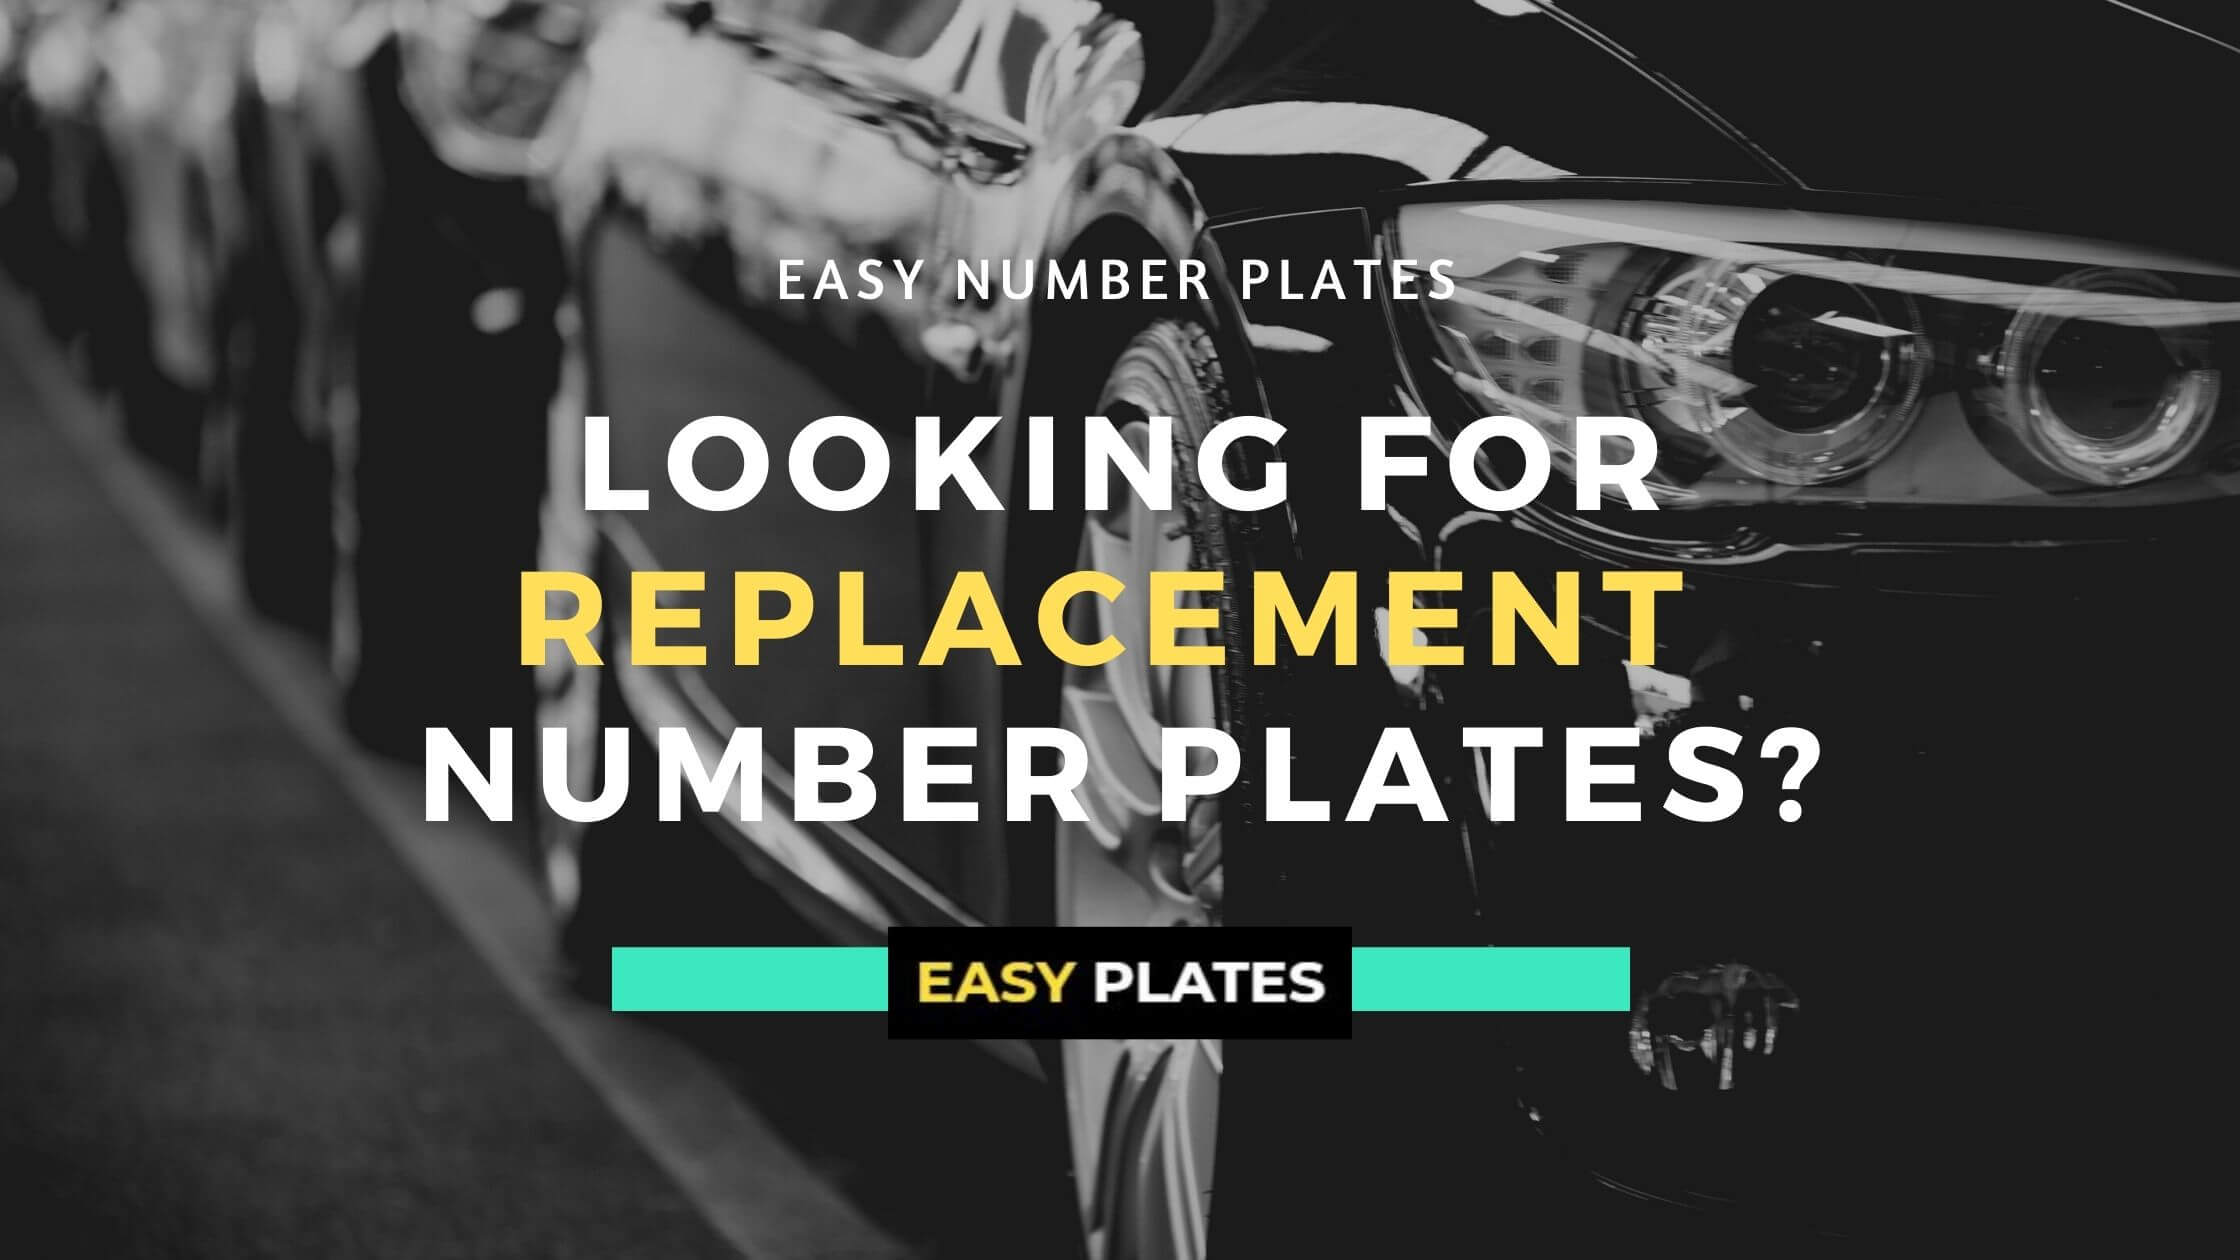 Looking for Replacement Number Plates? Here’s What You Should Know